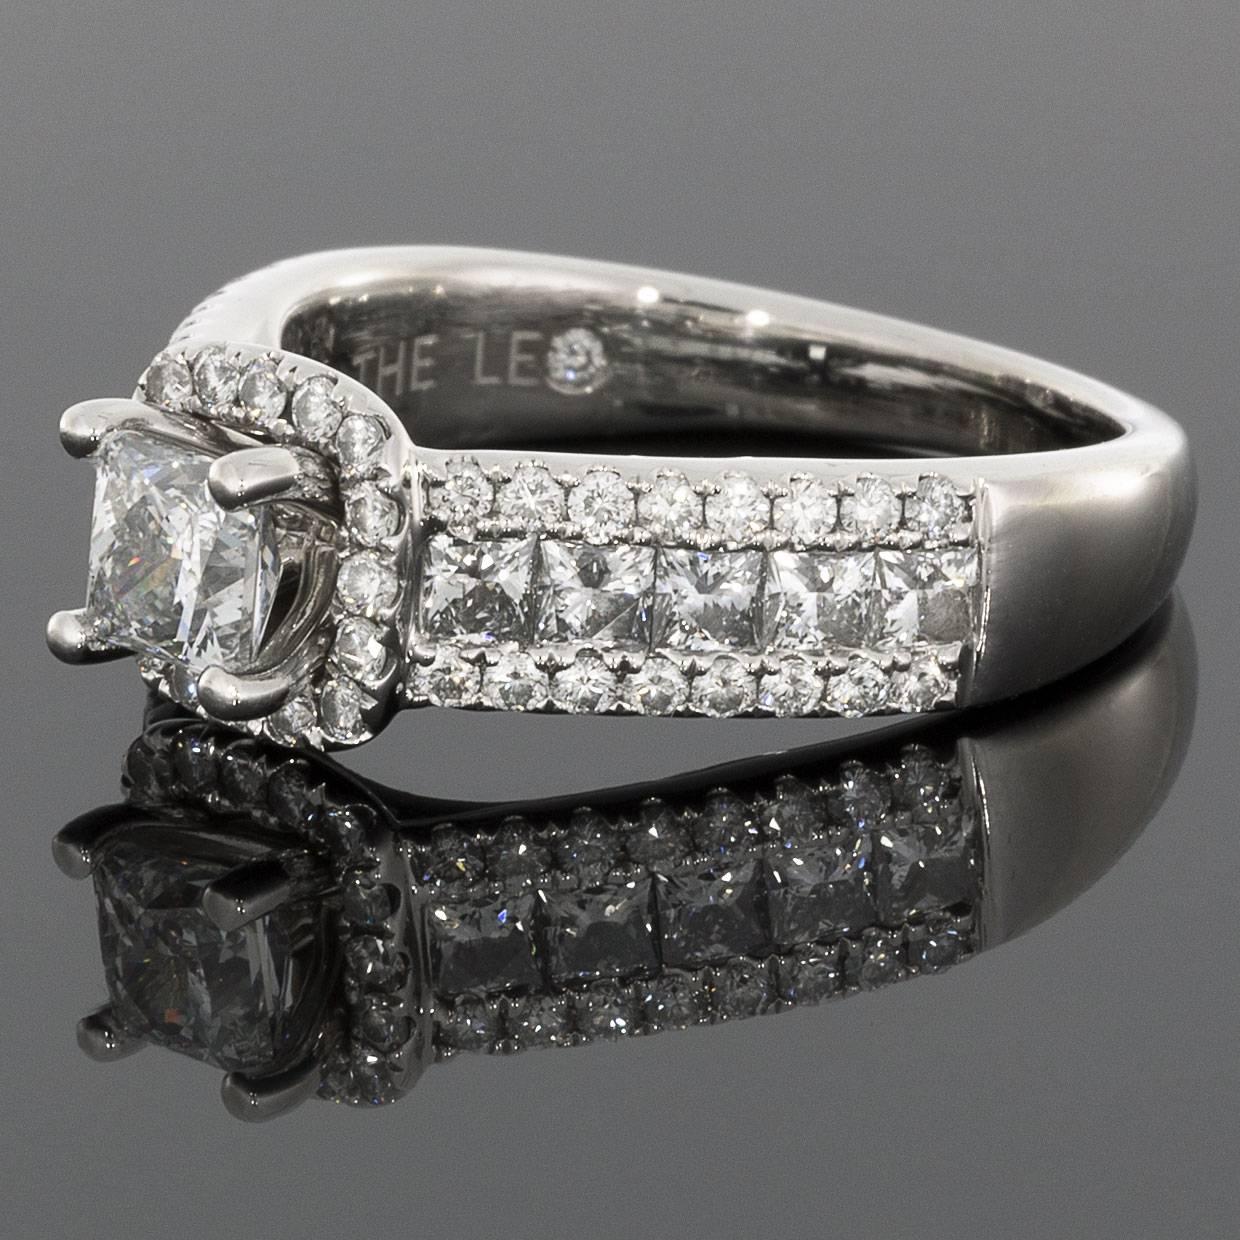 The Leo Diamond® was the first diamond ever to be independently certified for superior brilliance & beauty. Its unique cut results in unrivaled sparkle & scintillation, making it visibly brighter than other comparable conventional diamonds. This